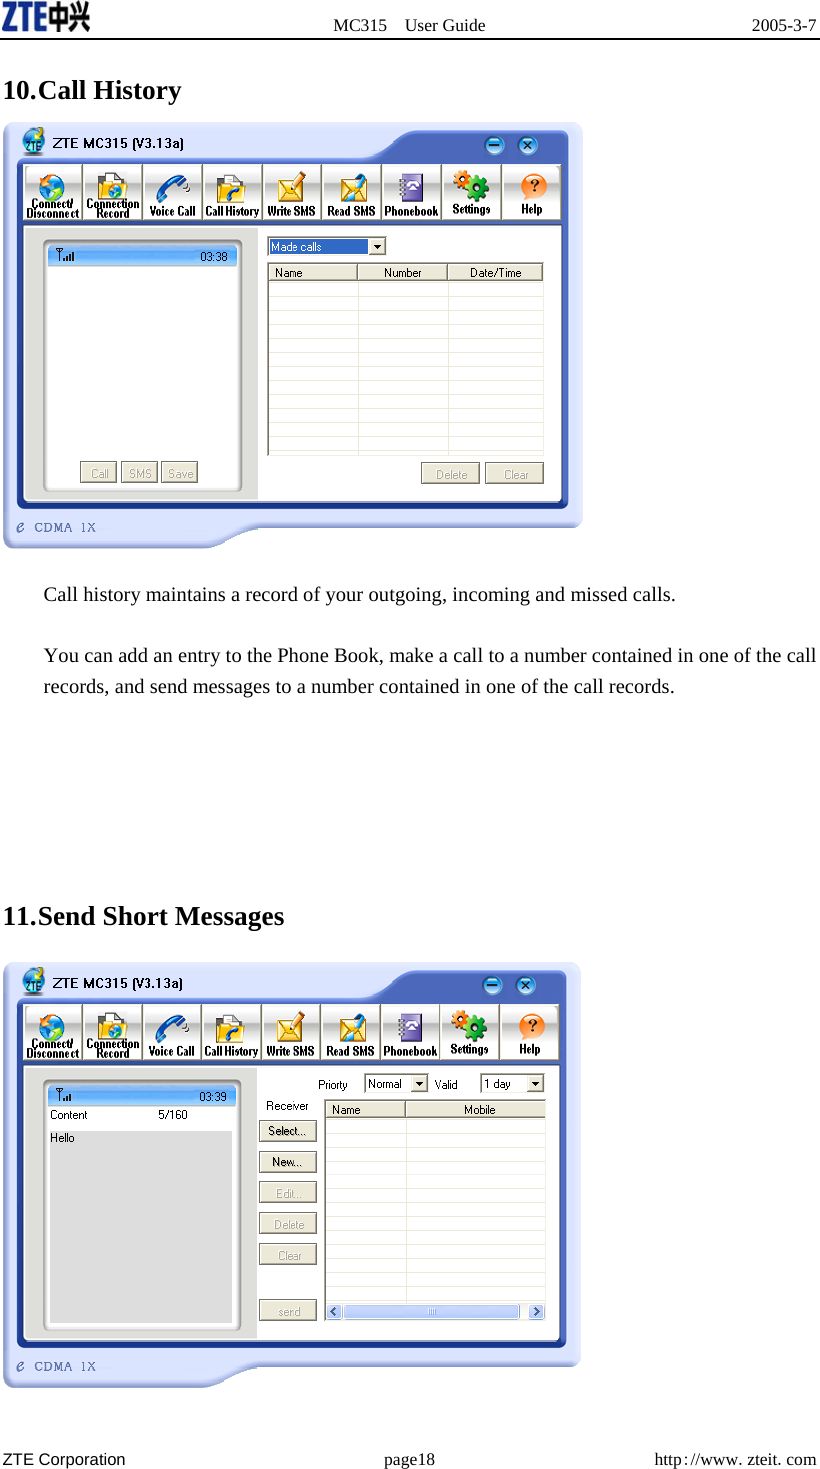  MC315 User Guide  2005-3-7  ZTE Corporation page18 http://www.zteit.com 10. Call  History   Call history maintains a record of your outgoing, incoming and missed calls.    You can add an entry to the Phone Book, make a call to a number contained in one of the call records, and send messages to a number contained in one of the call records.       11. Send  Short  Messages  